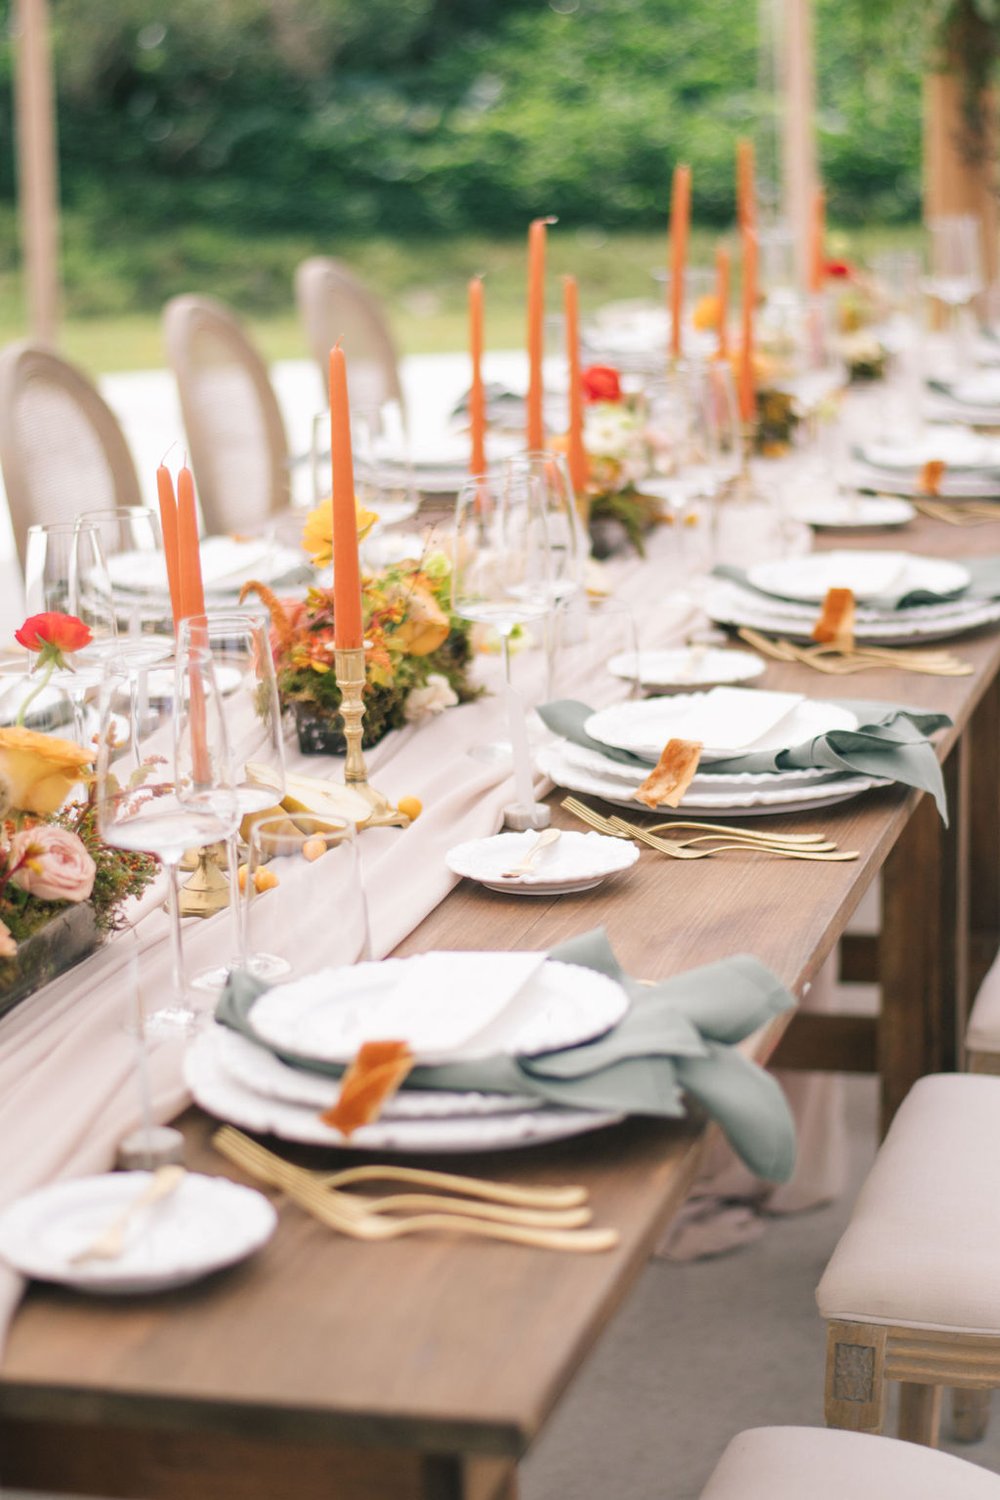 Fall inspired wedding table scape with taupe chiffon runners, Sonoma chairs, and harvest tables at Wakefield Estate.